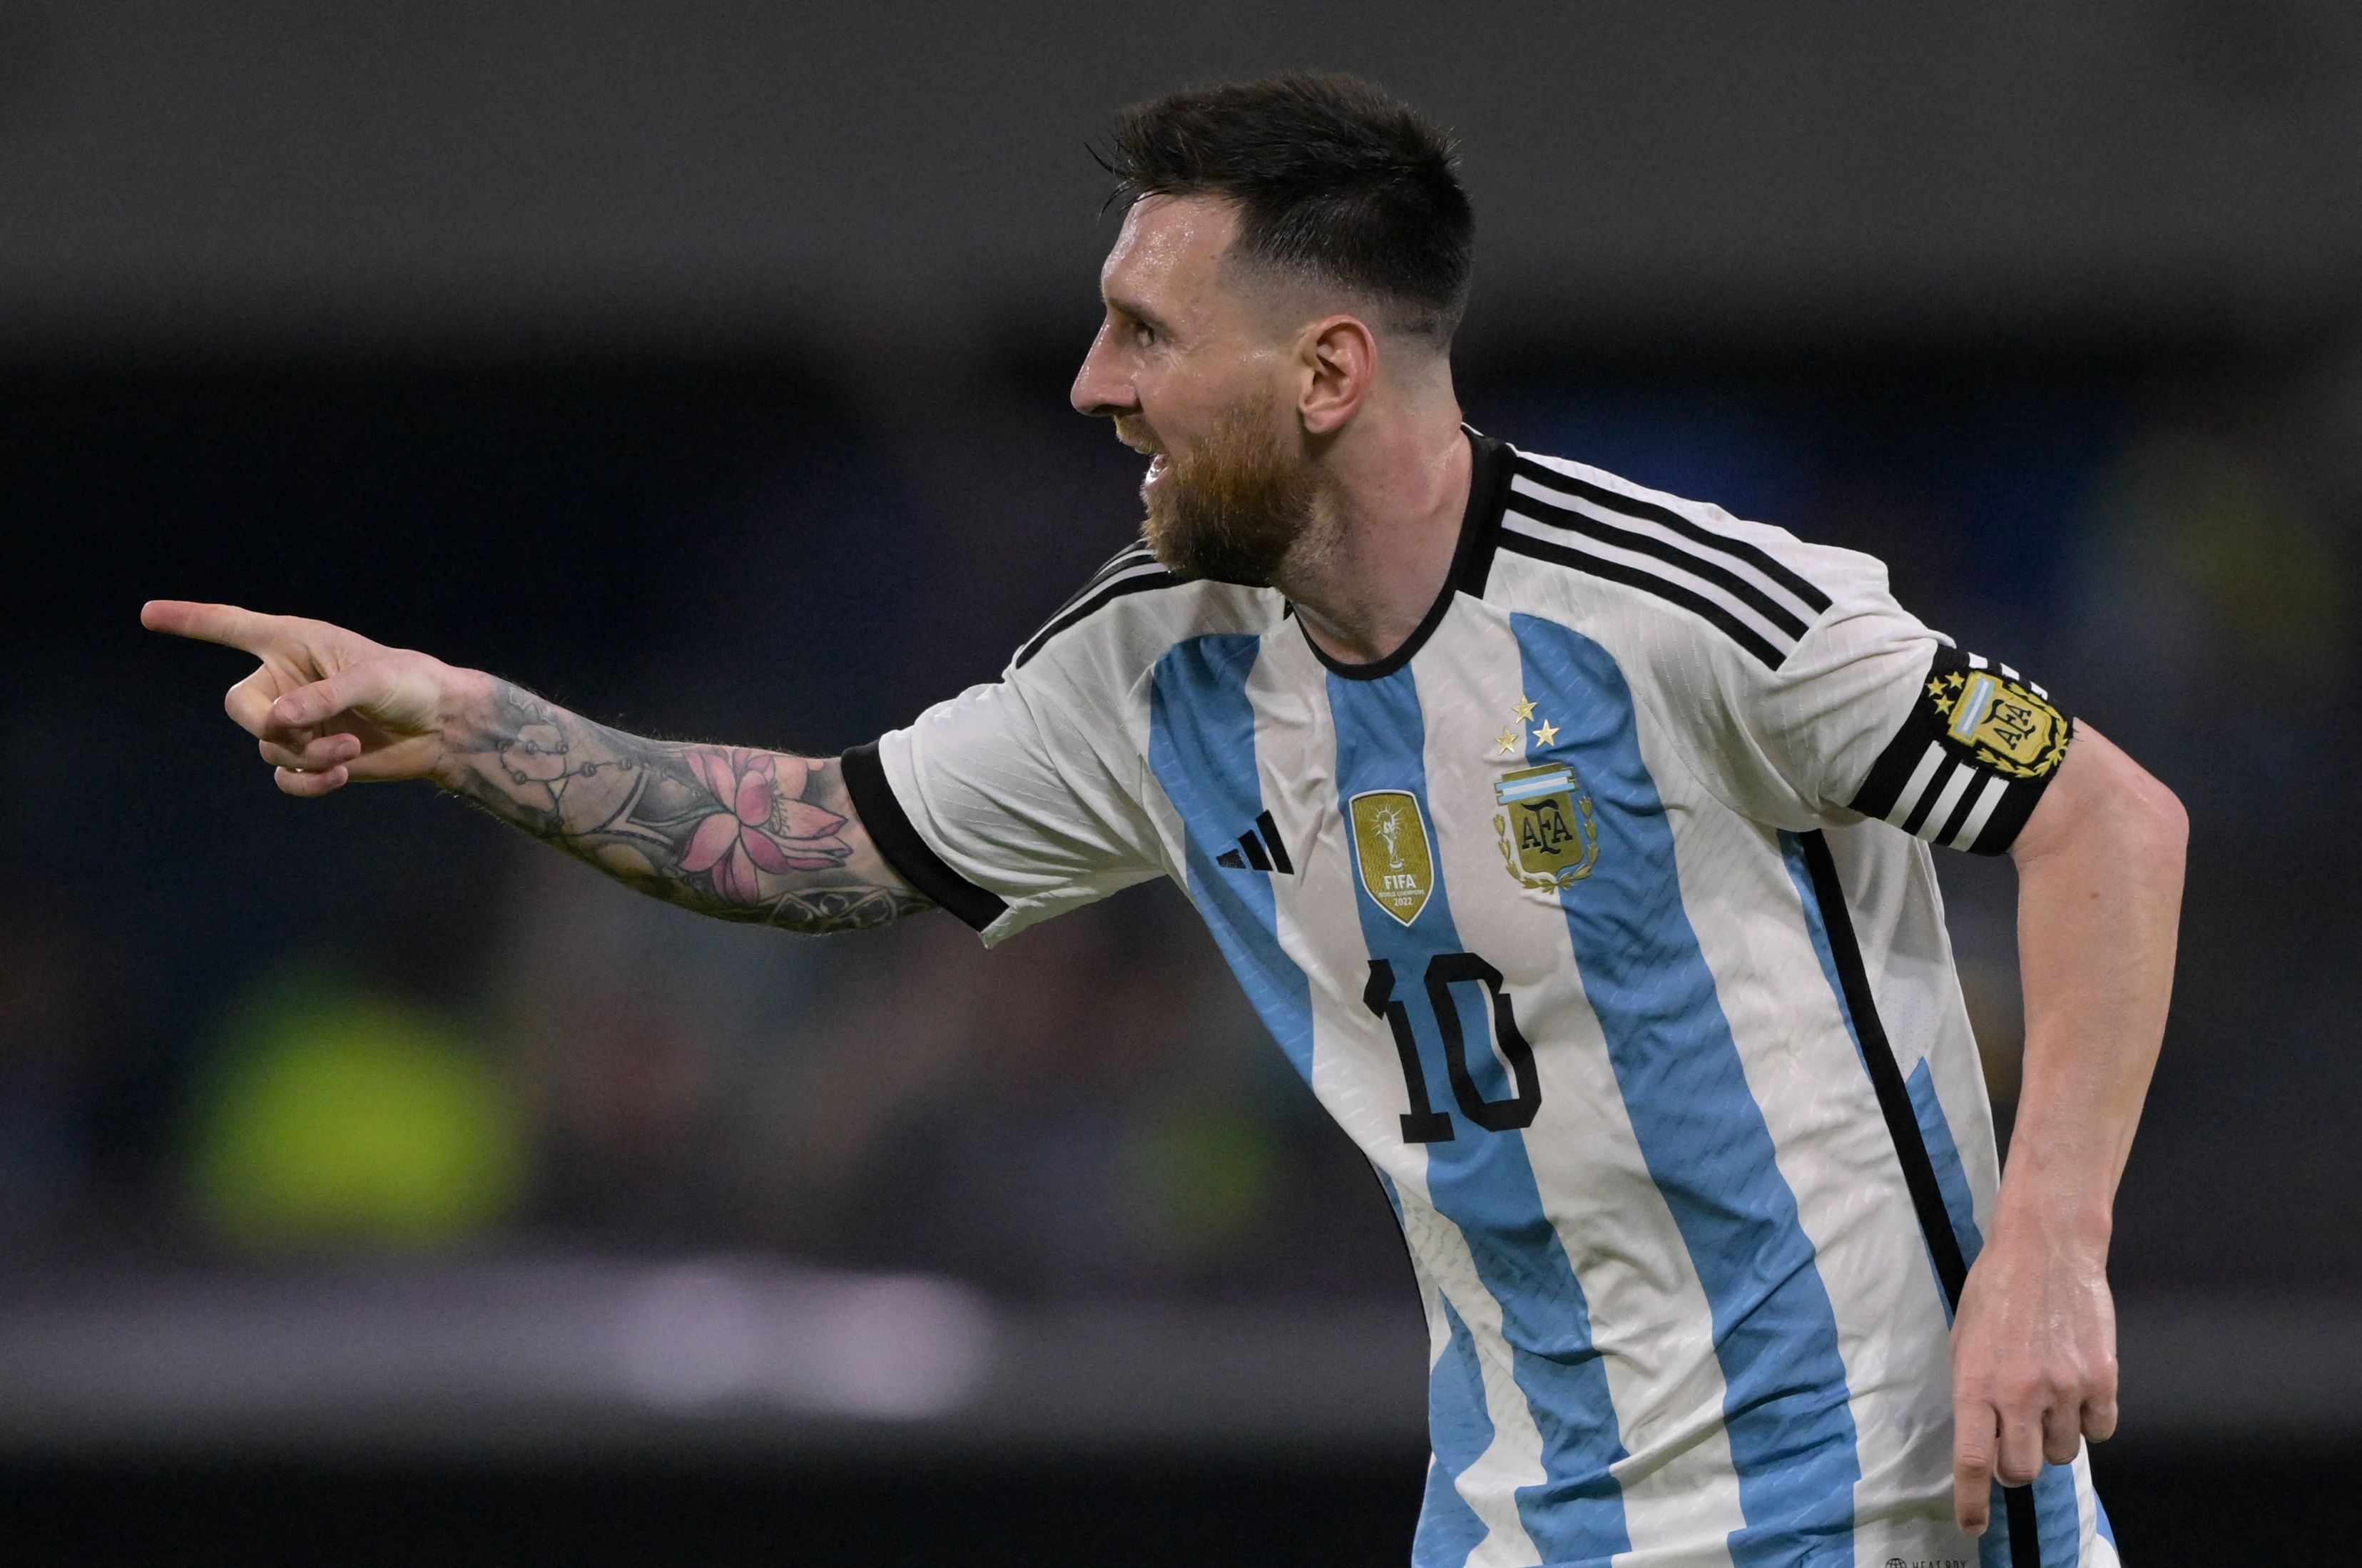 Mario Kempes wants to manage Lionel Messi and Argentina - Barca Blaugranes